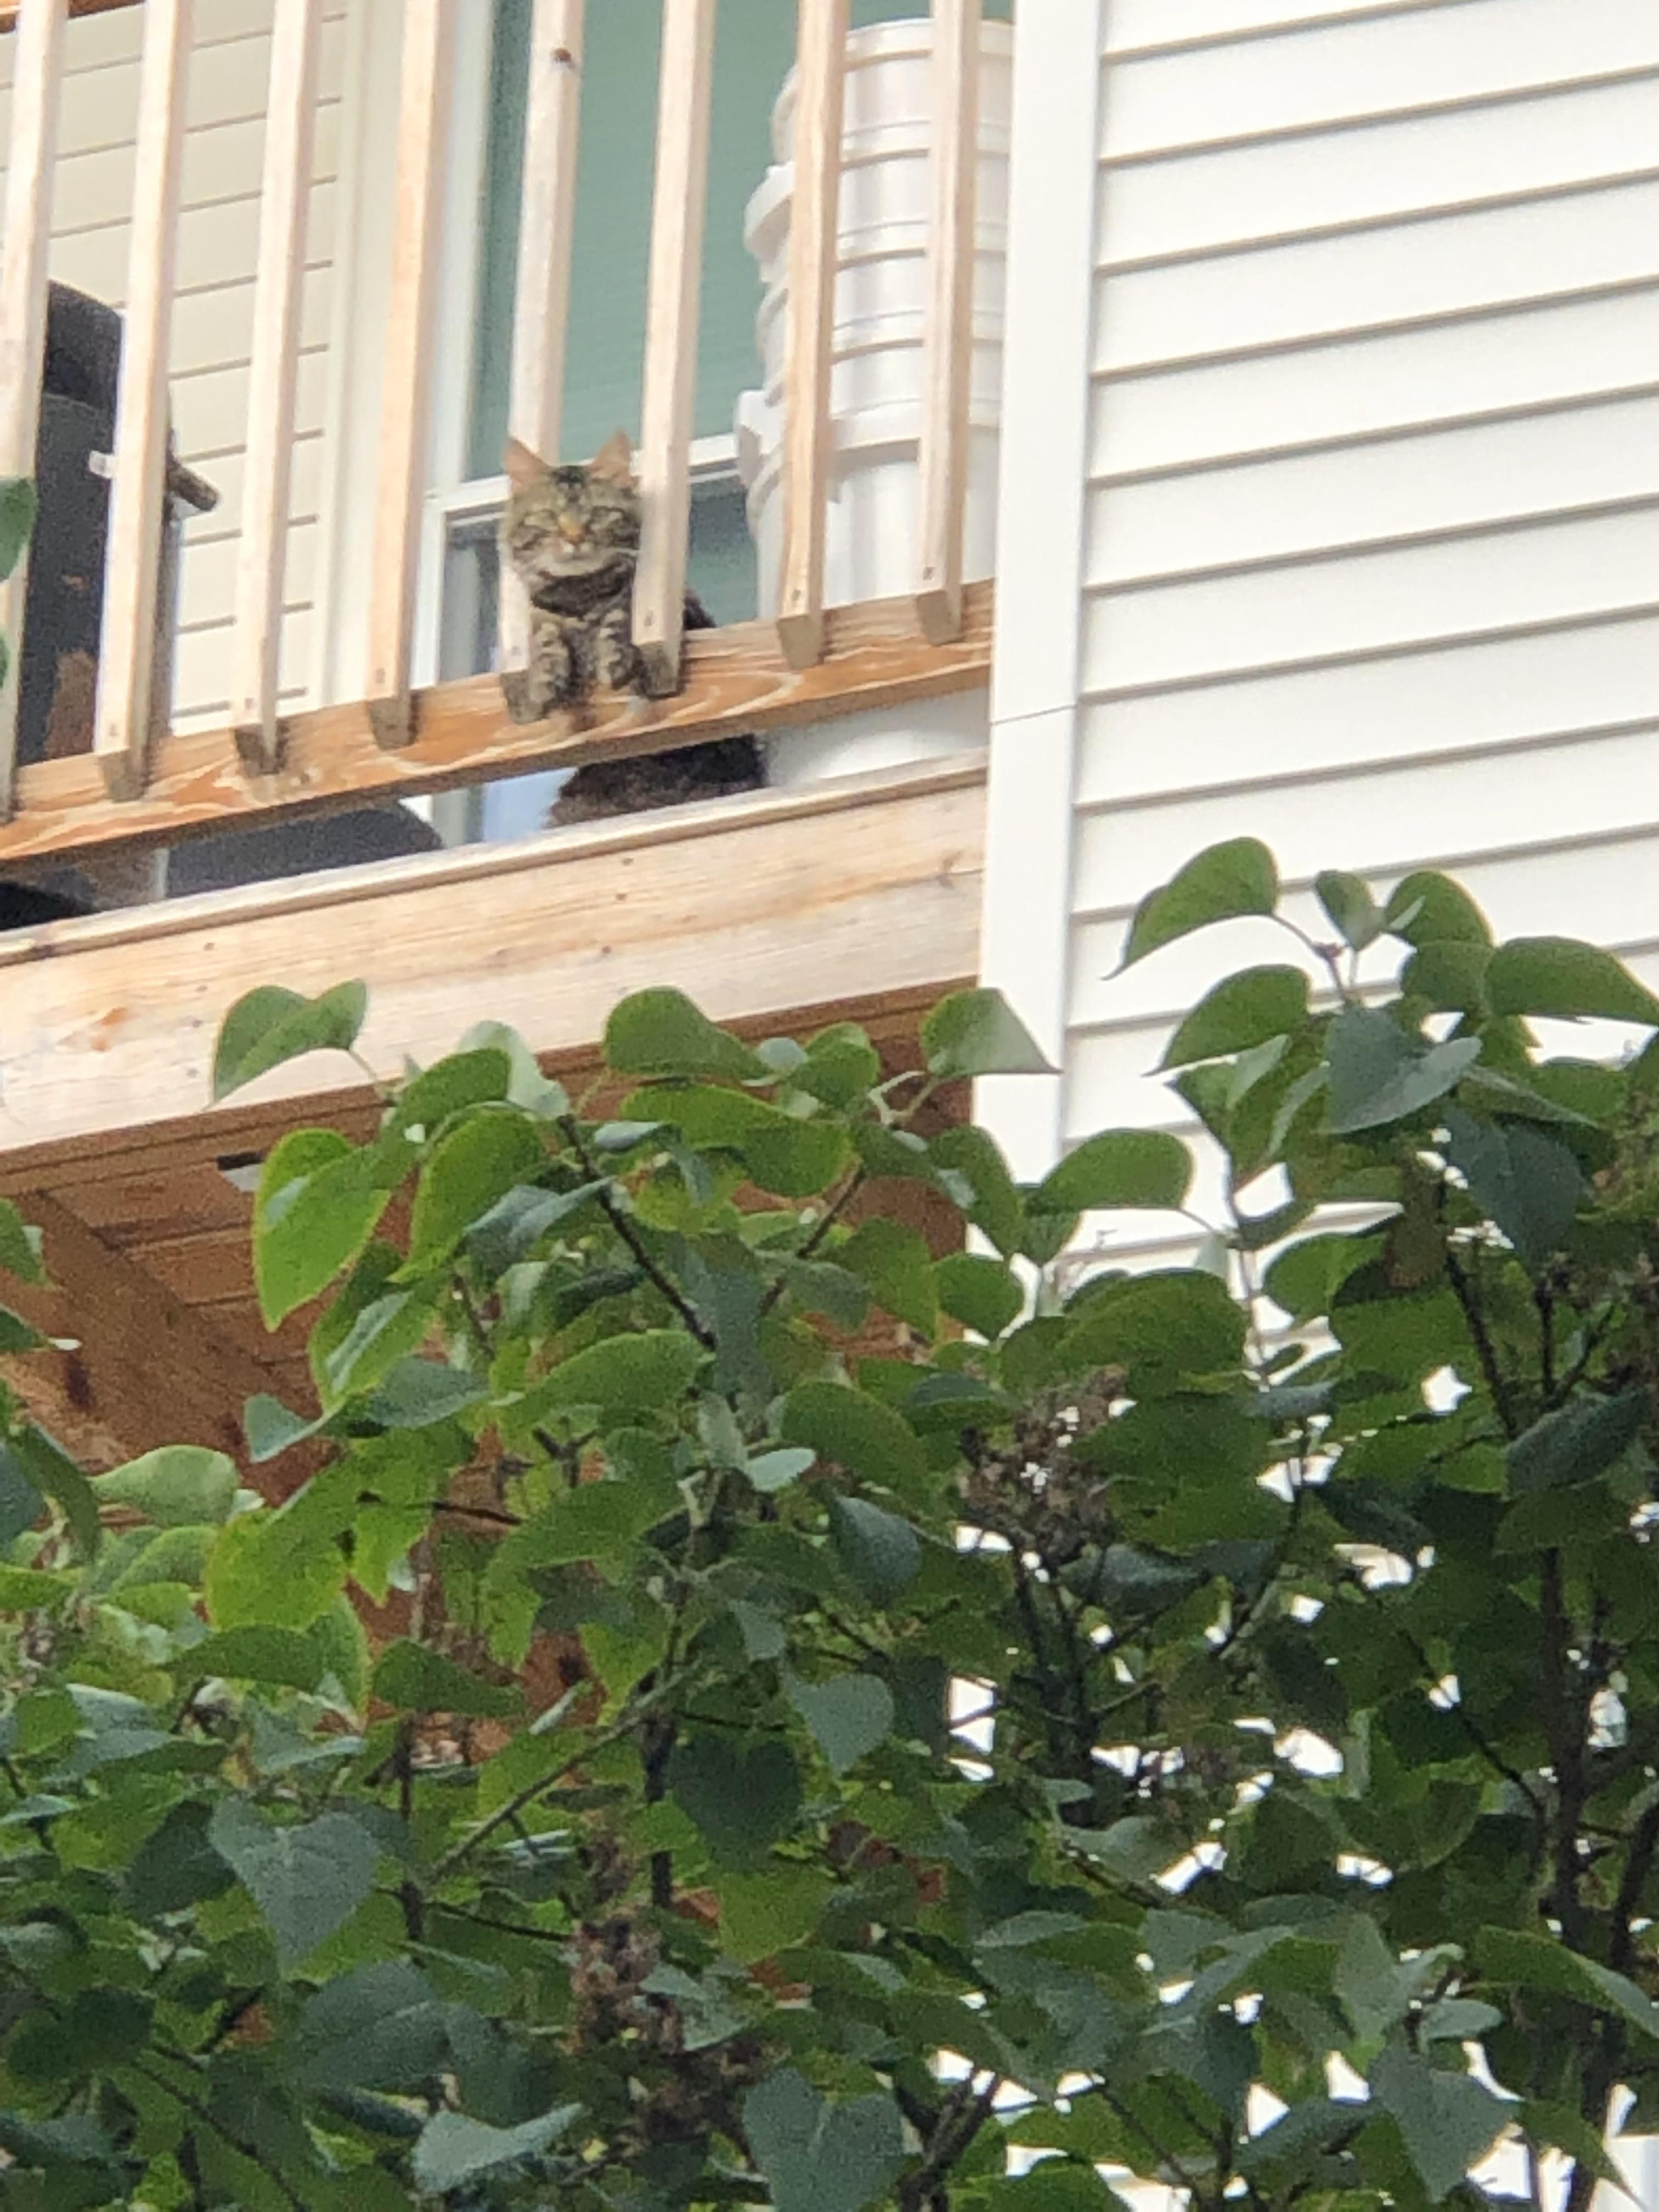 Every time I go out to smoke on my balcony, this cat always stares at me like he is worried about my life choices.